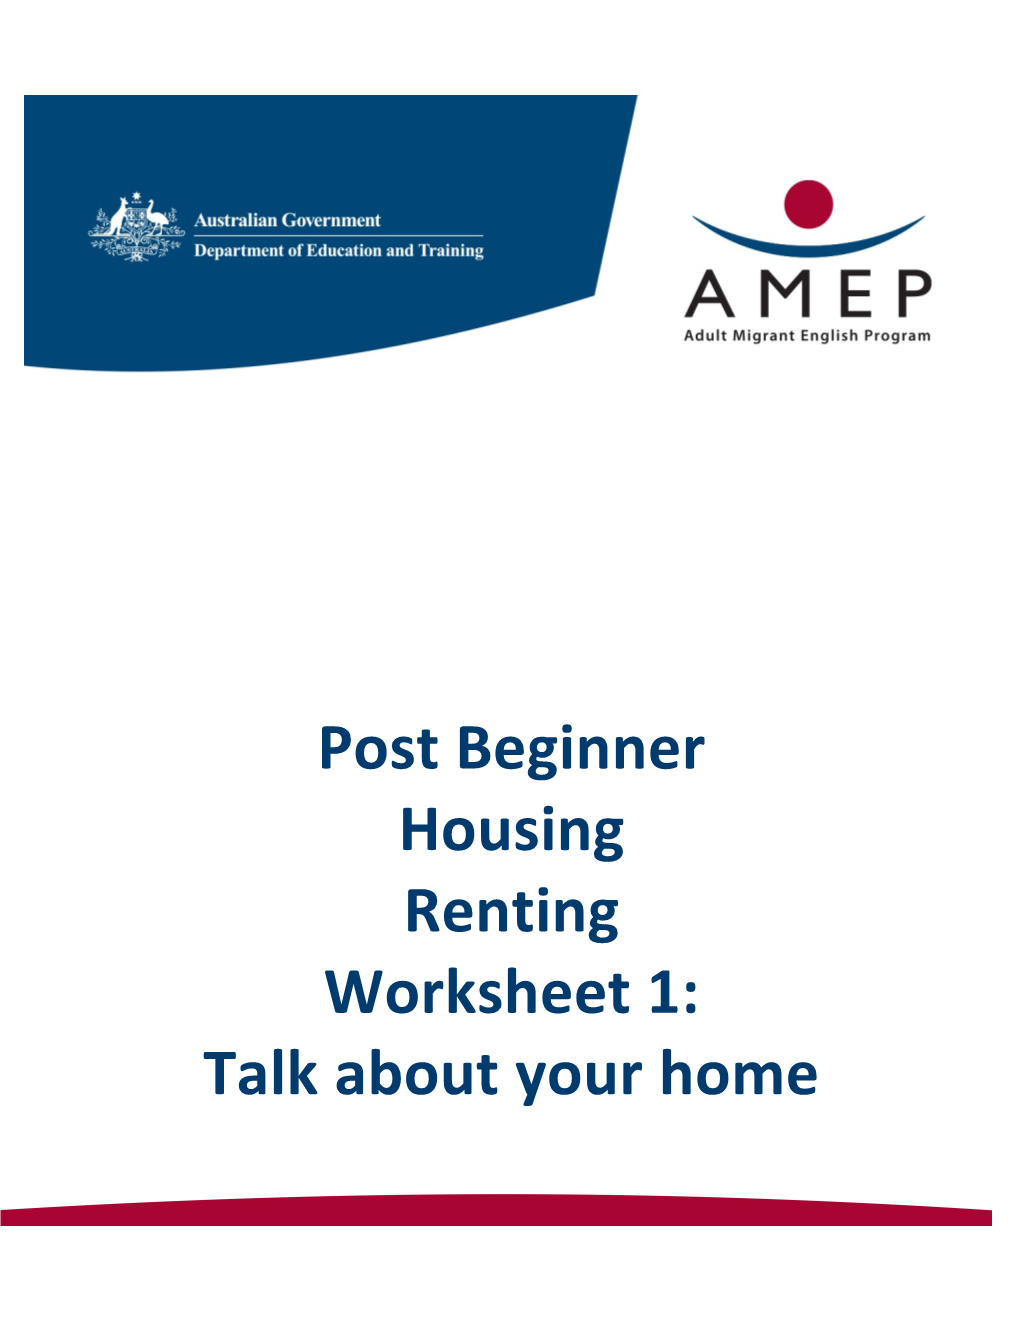 Post Beginner Housing Renting Worksheet 1: Talk About Your Home